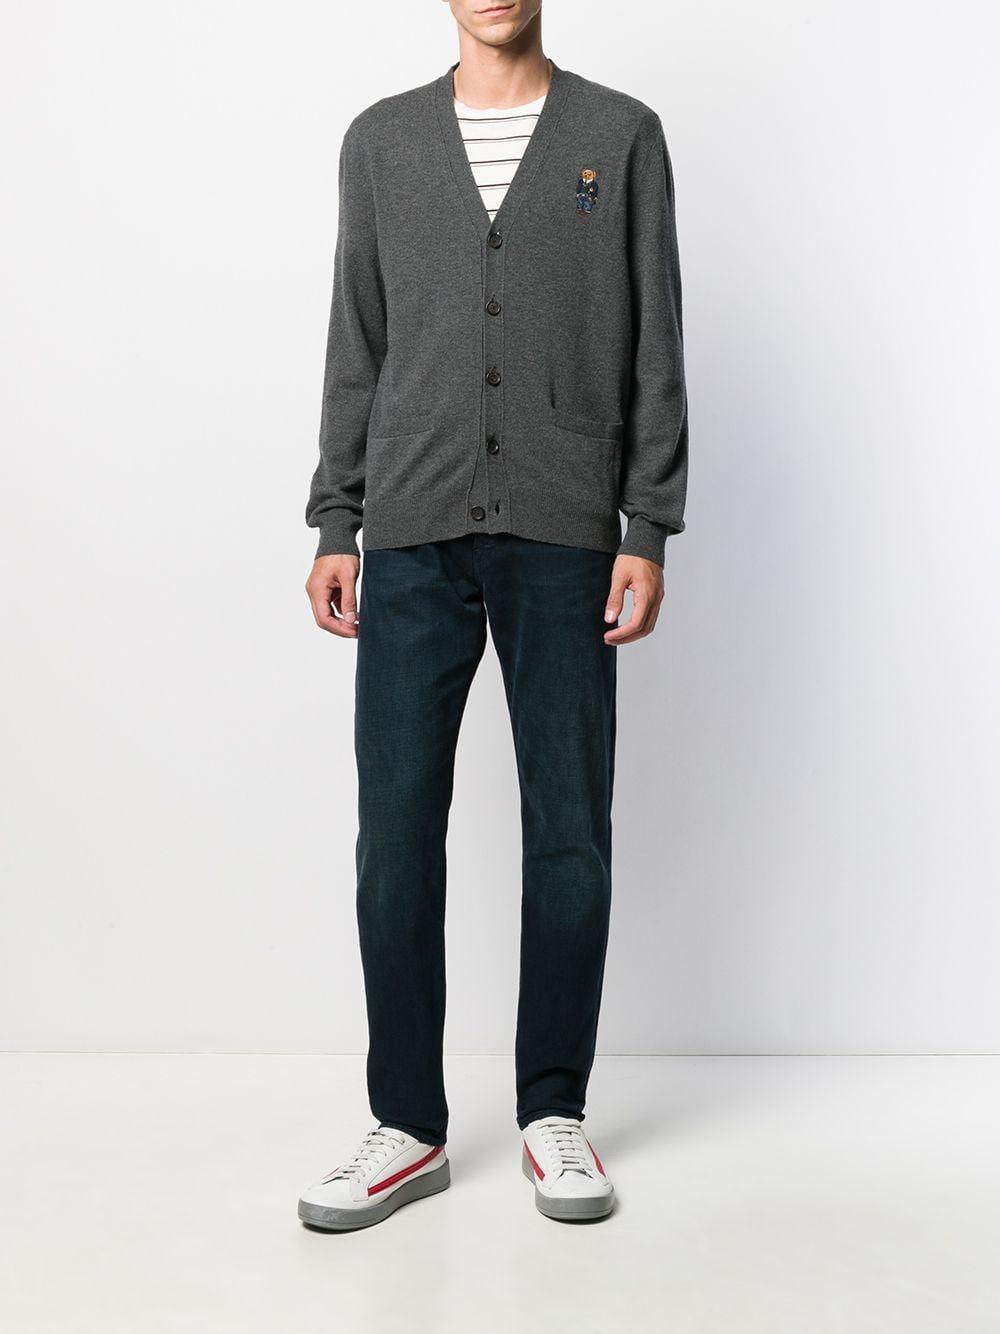 Polo Ralph Lauren Embroidered Bear Cardigan in Gray for Men | Lyst